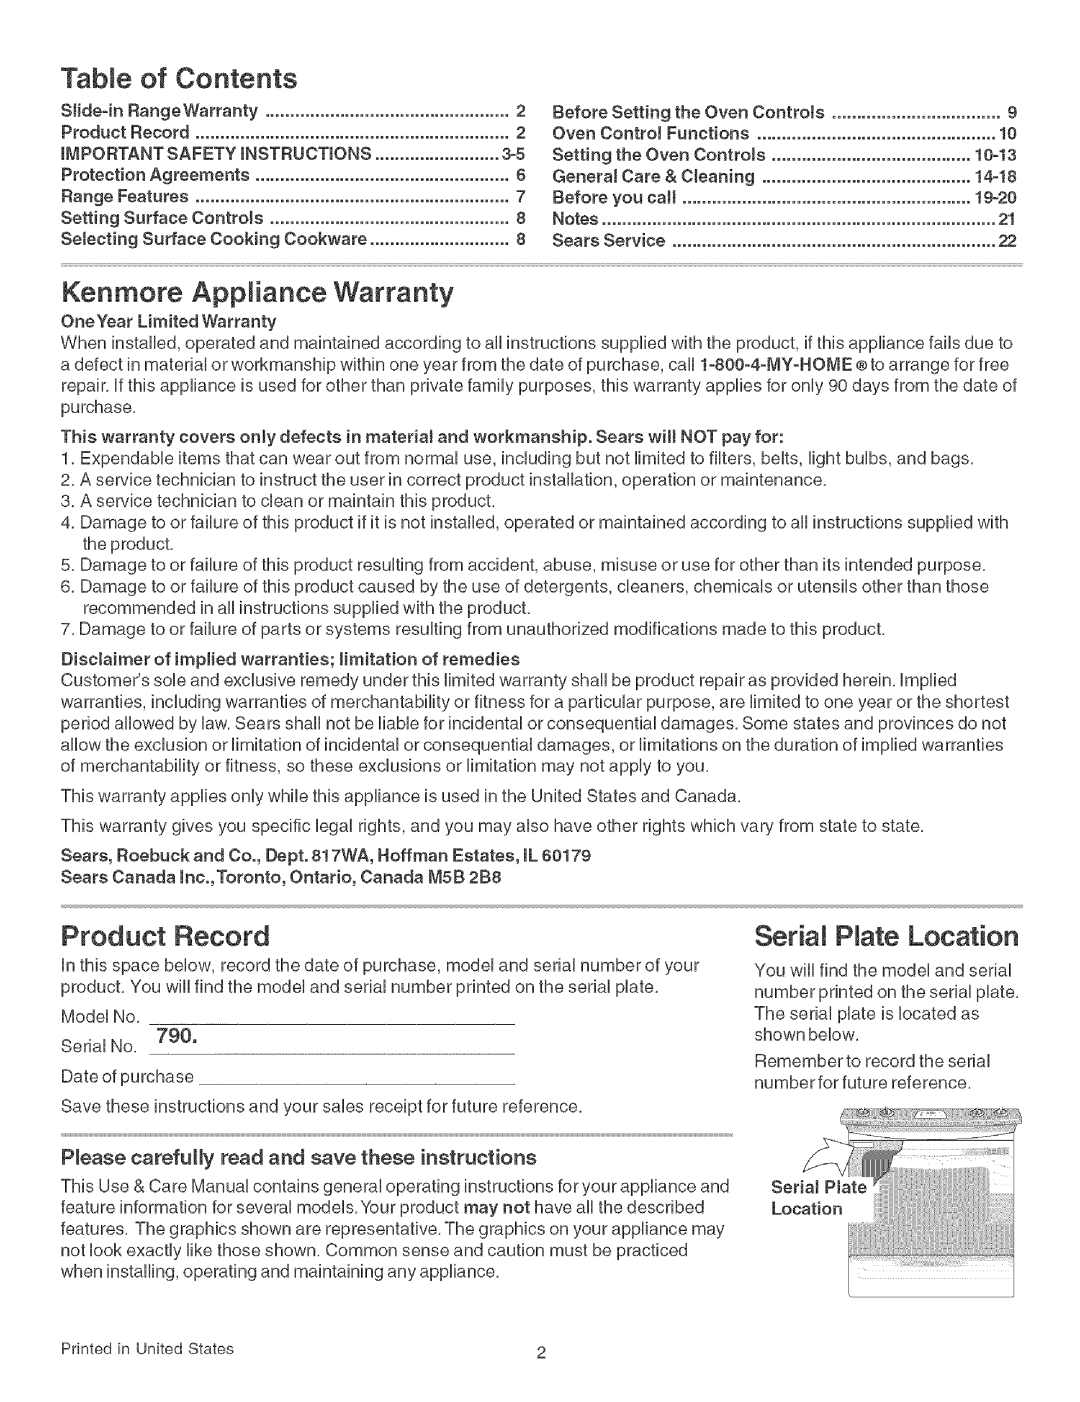 Kenmore 790.46268 manual Contents, Kenmore Appliance Warranty, Product Record, Seria P ate Location 